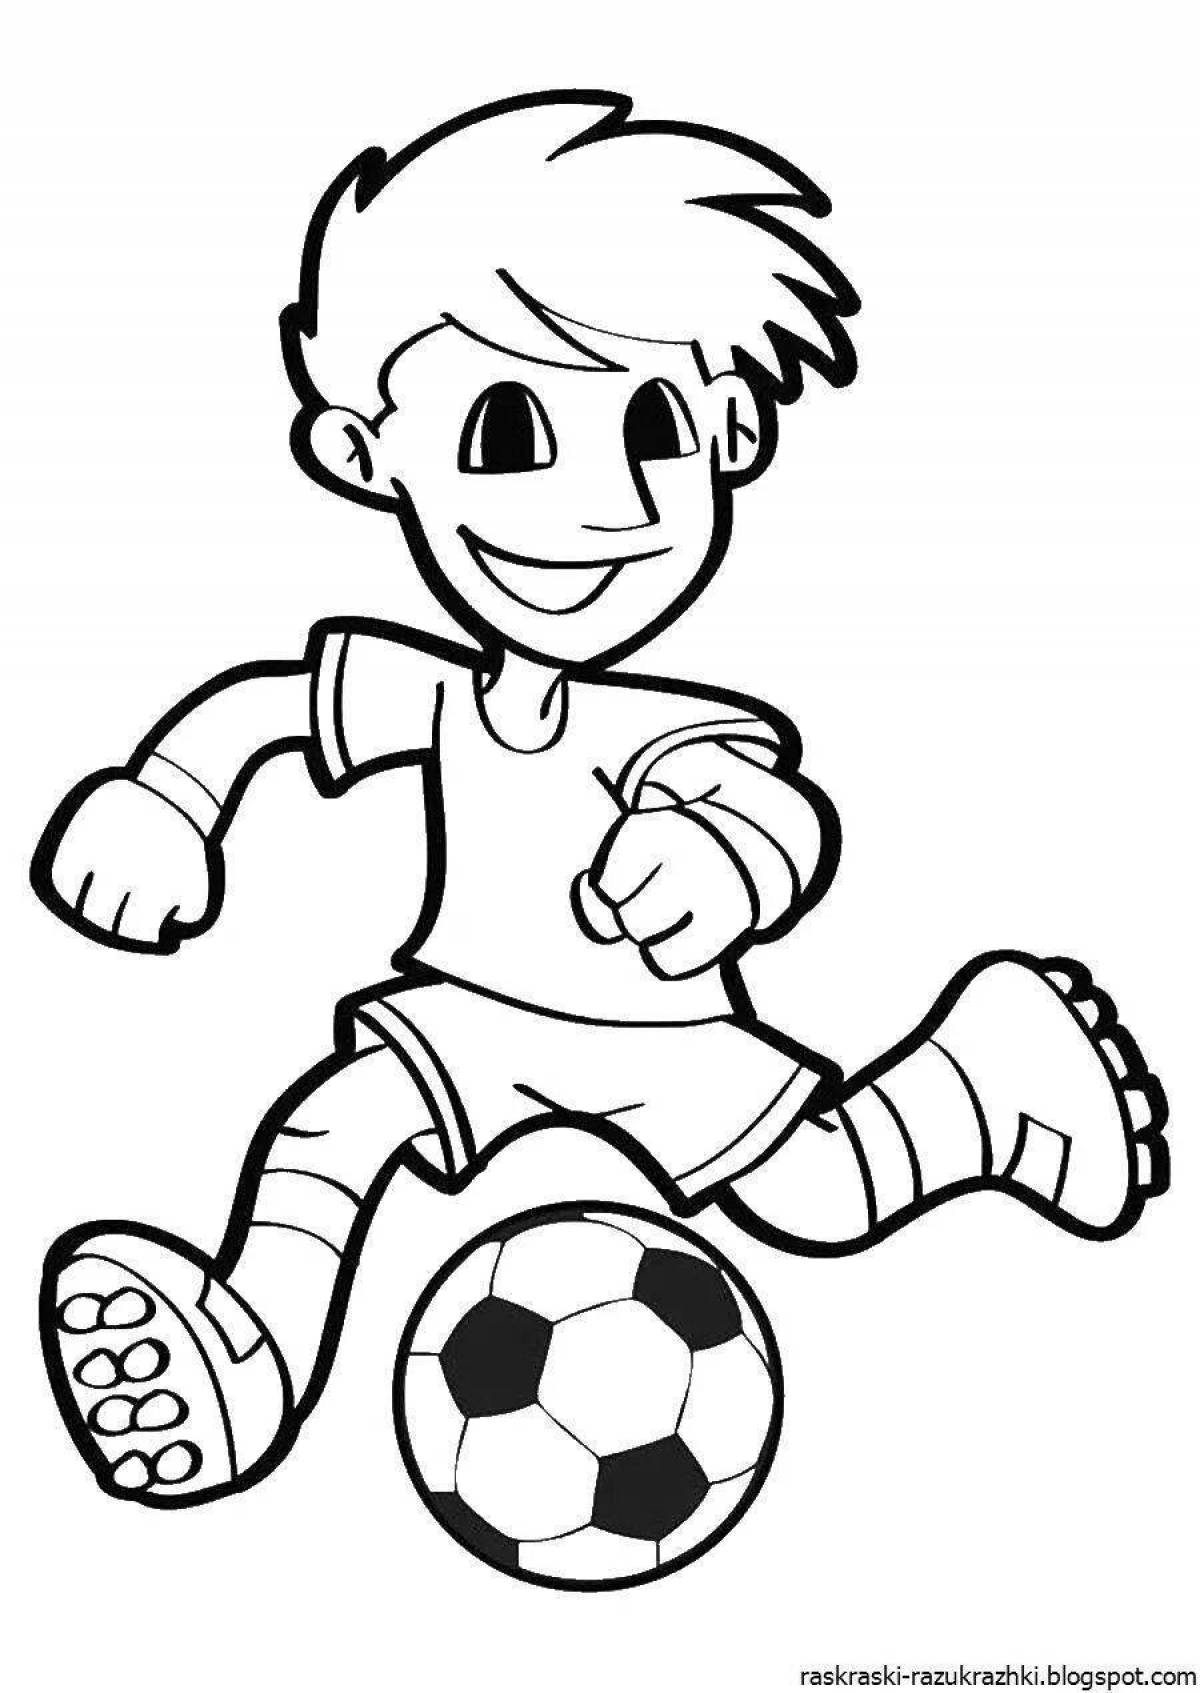 Incredible sports coloring book